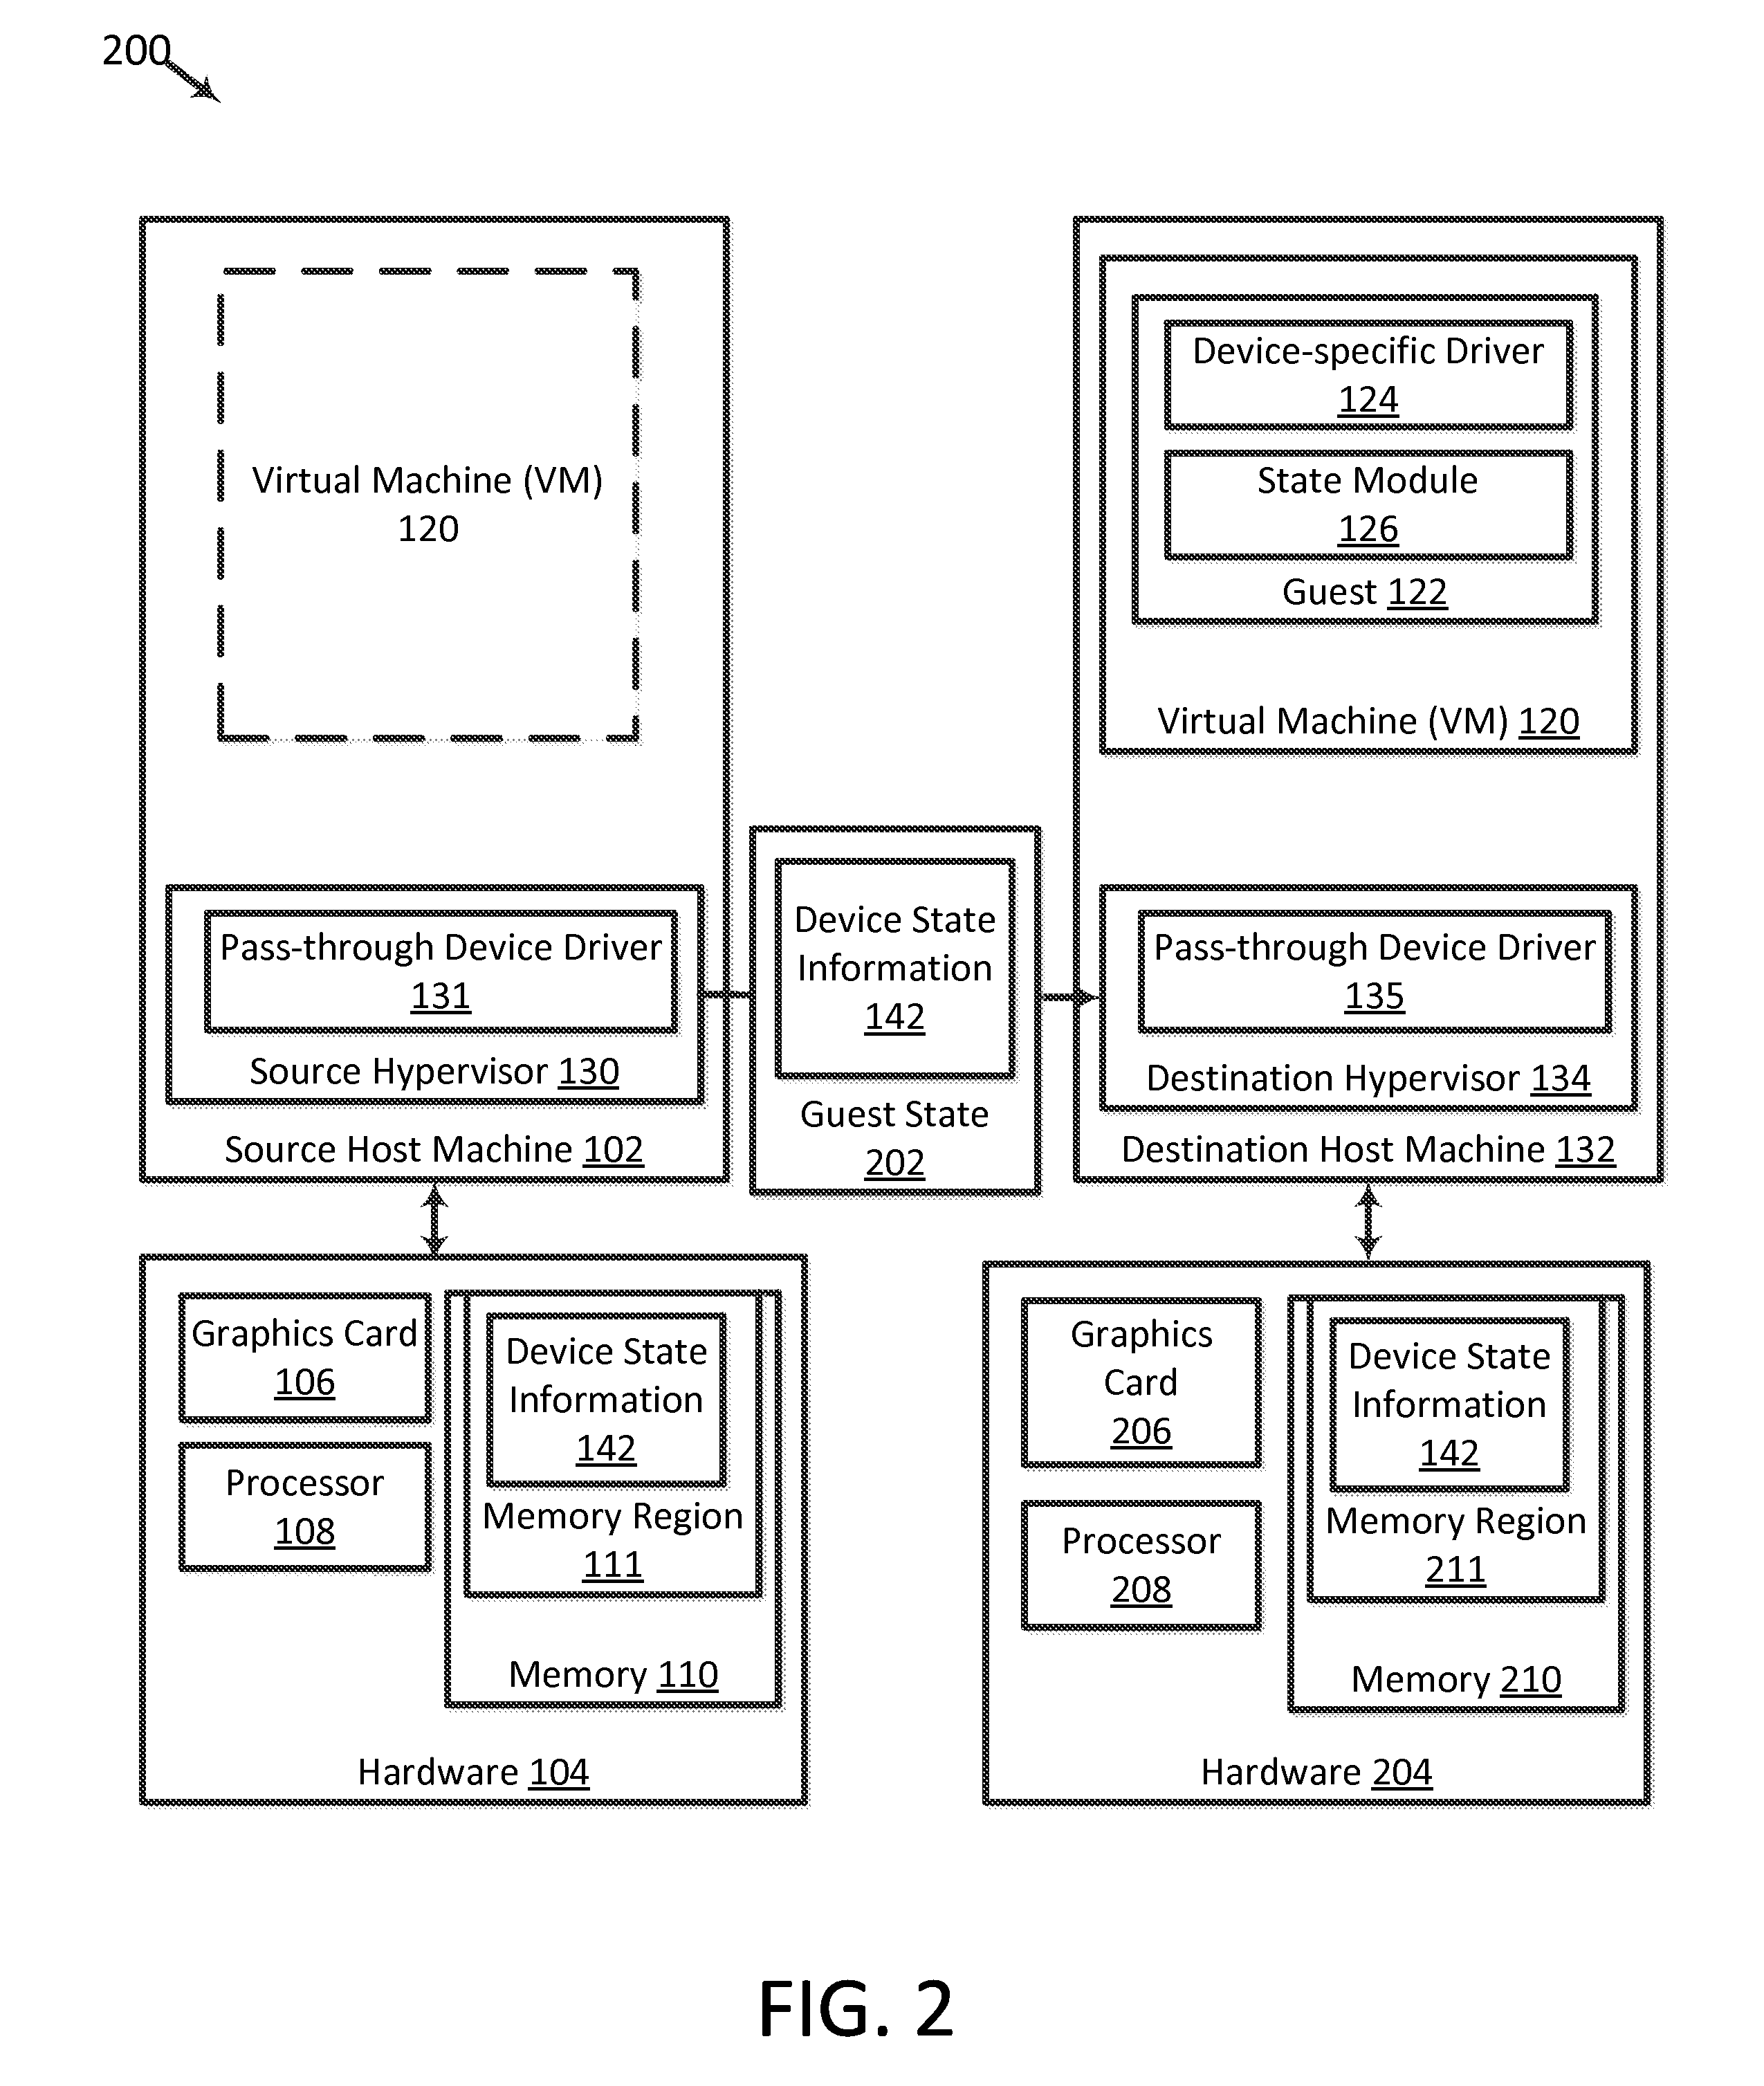 Guest Management of Devices Assigned to a Virtual Machine